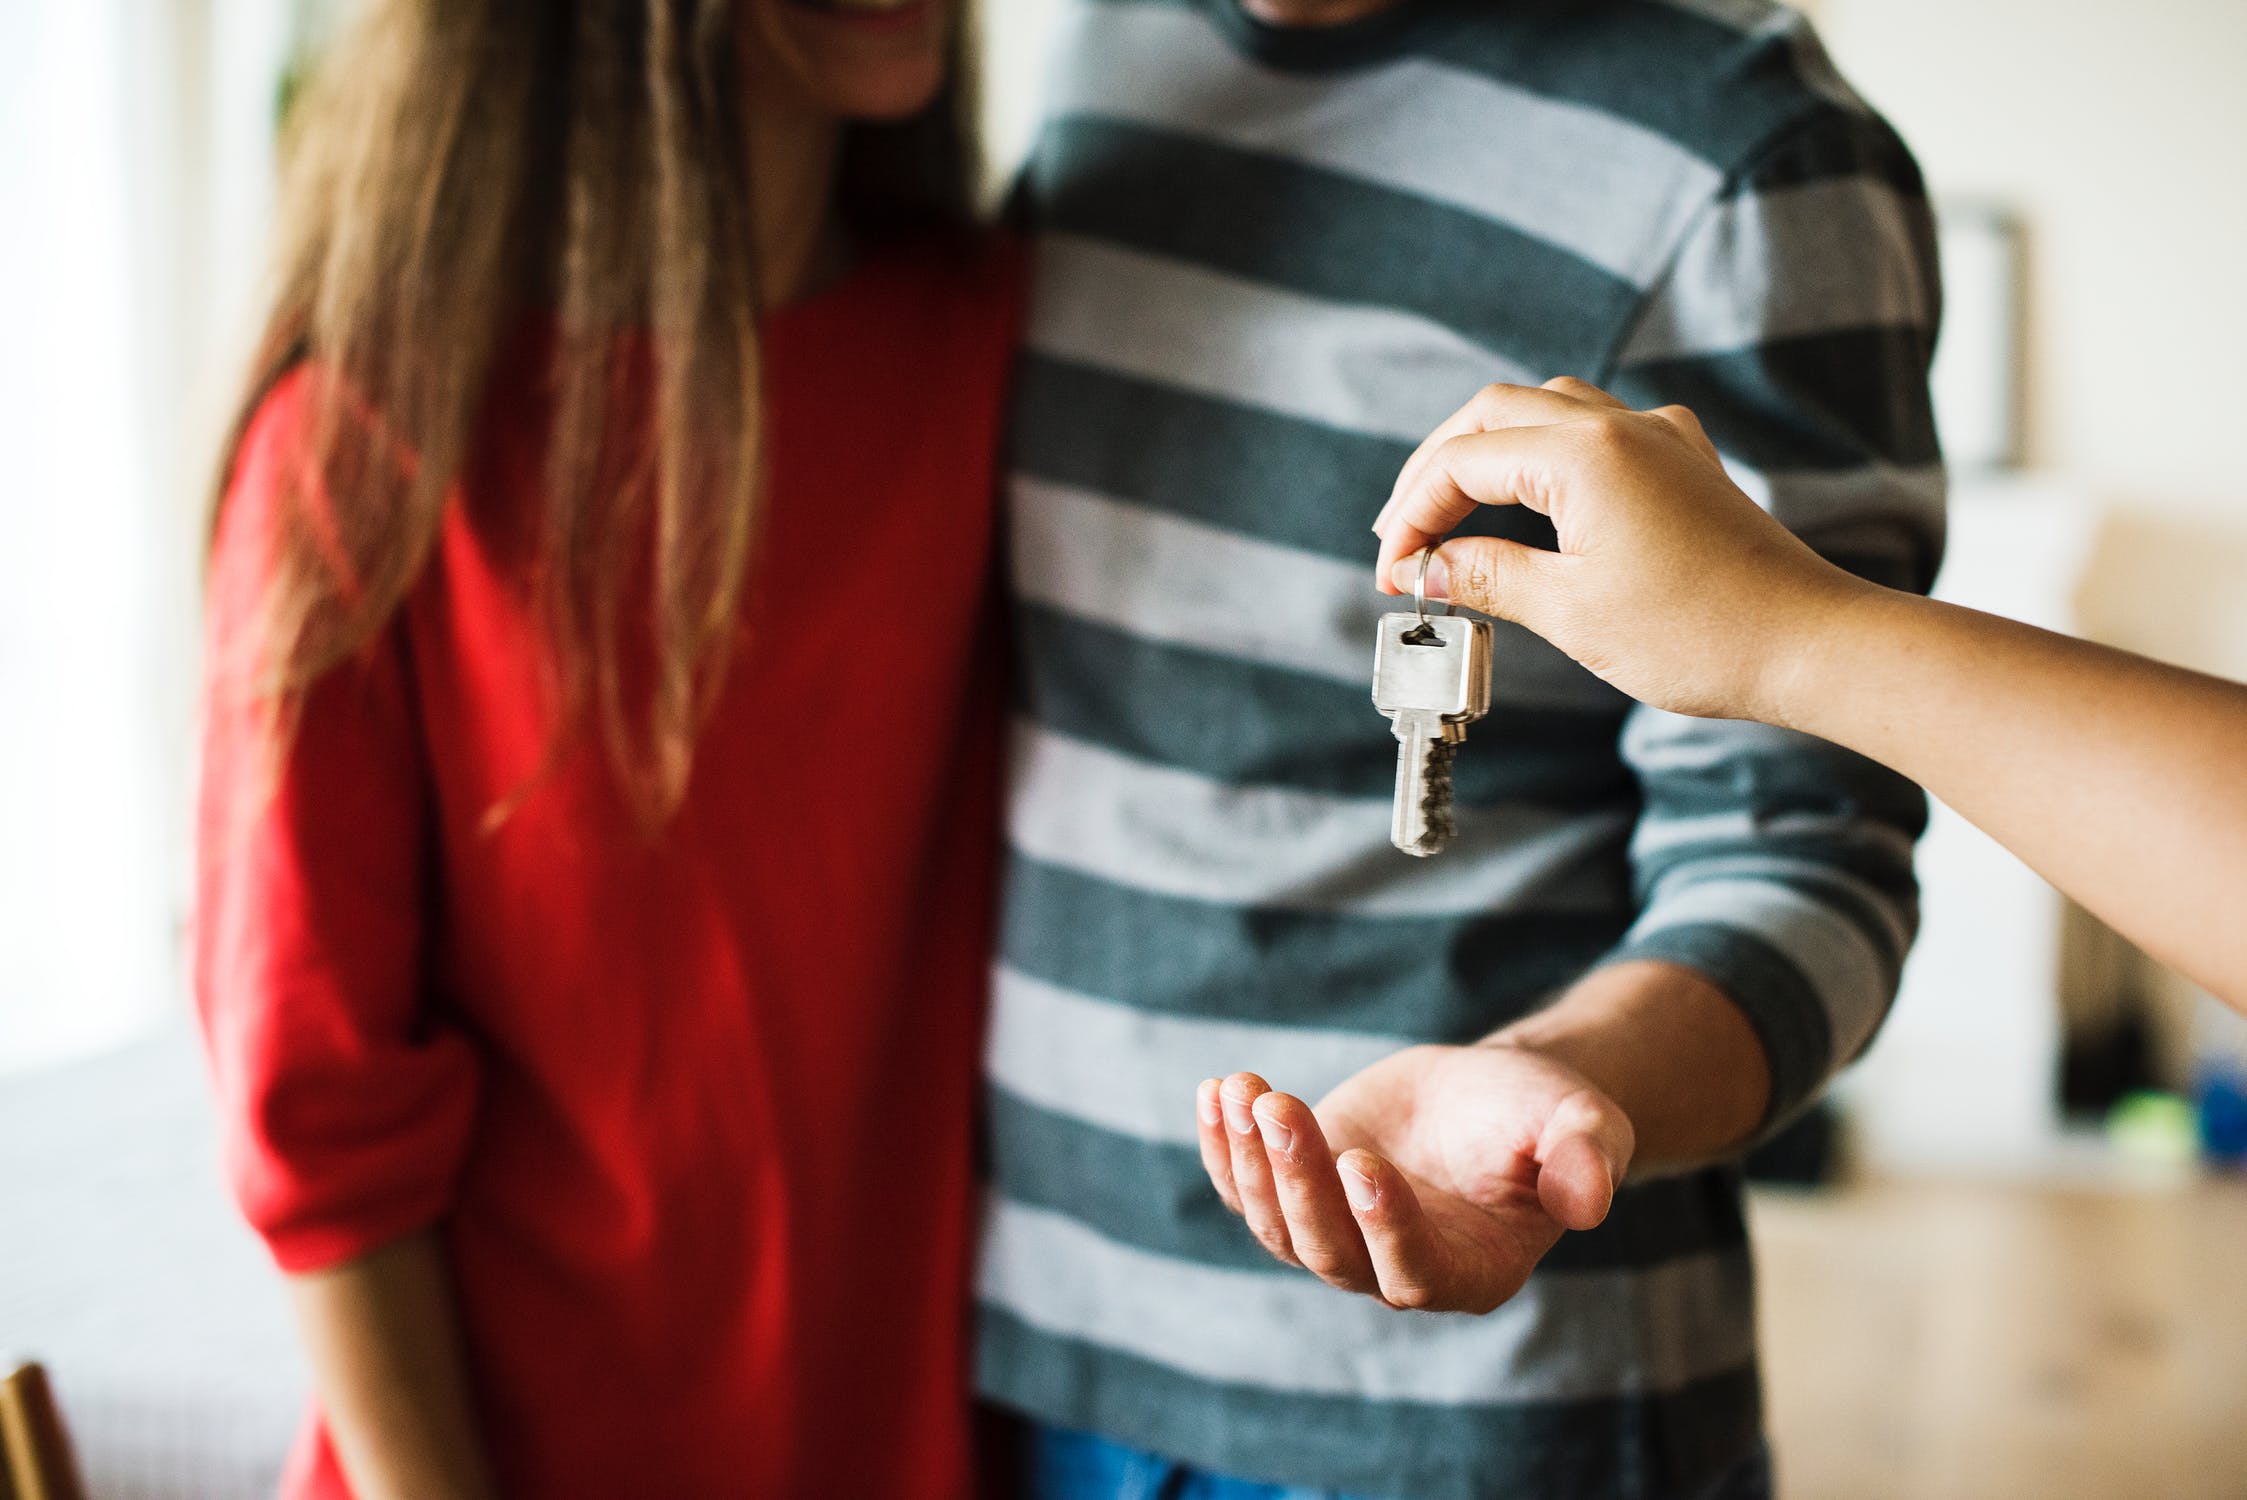 Handing over keys while closing a deal on a home